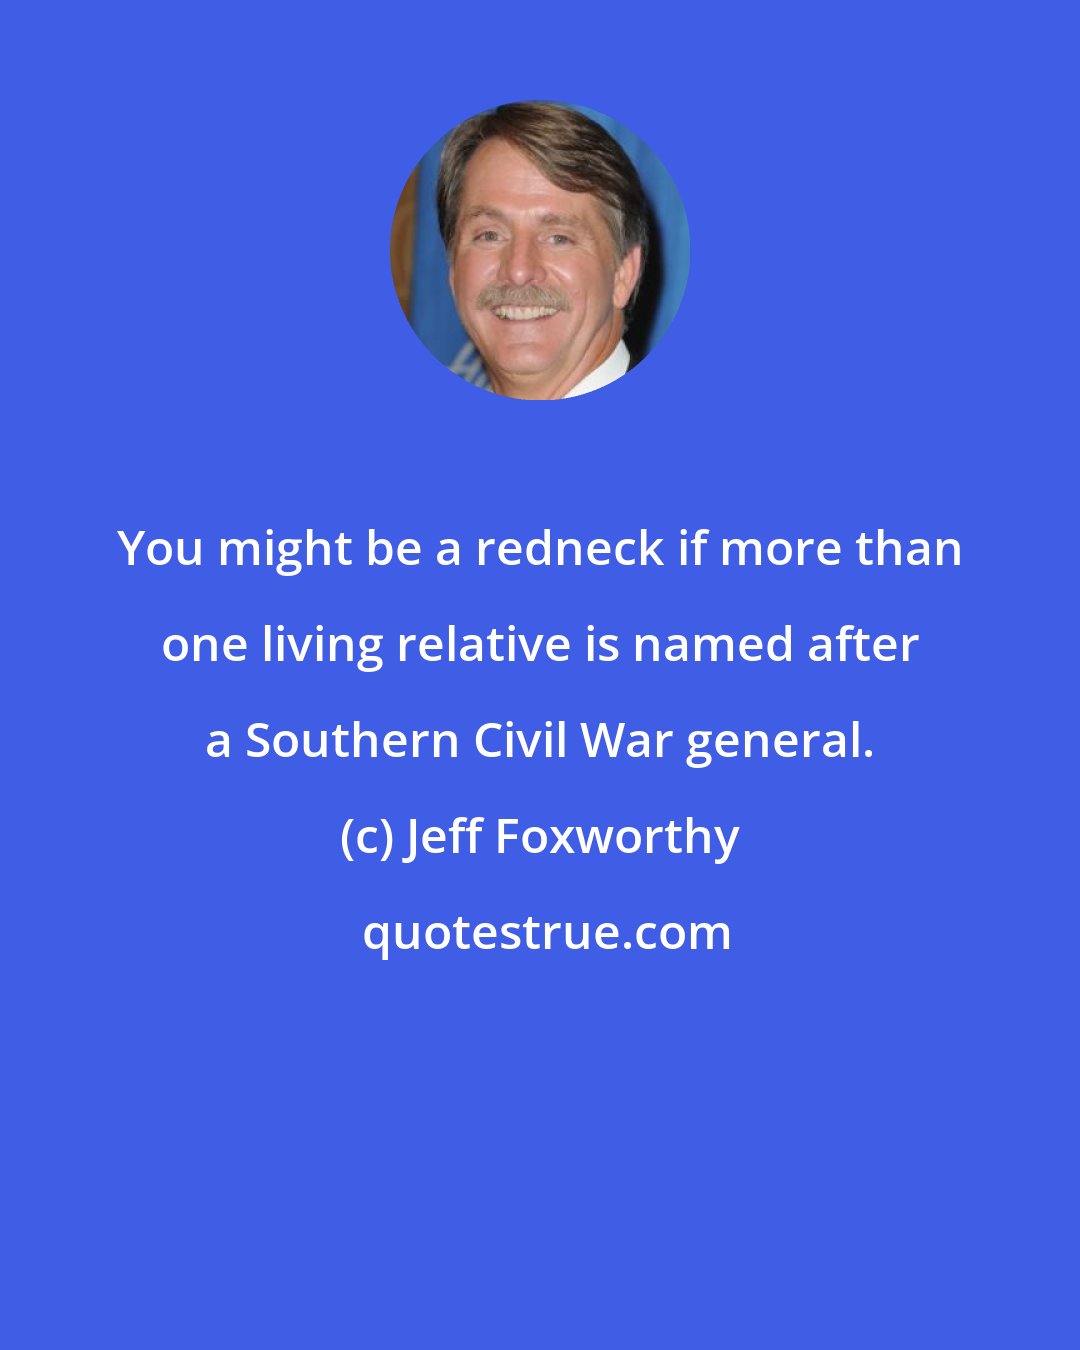 Jeff Foxworthy: You might be a redneck if more than one living relative is named after a Southern Civil War general.